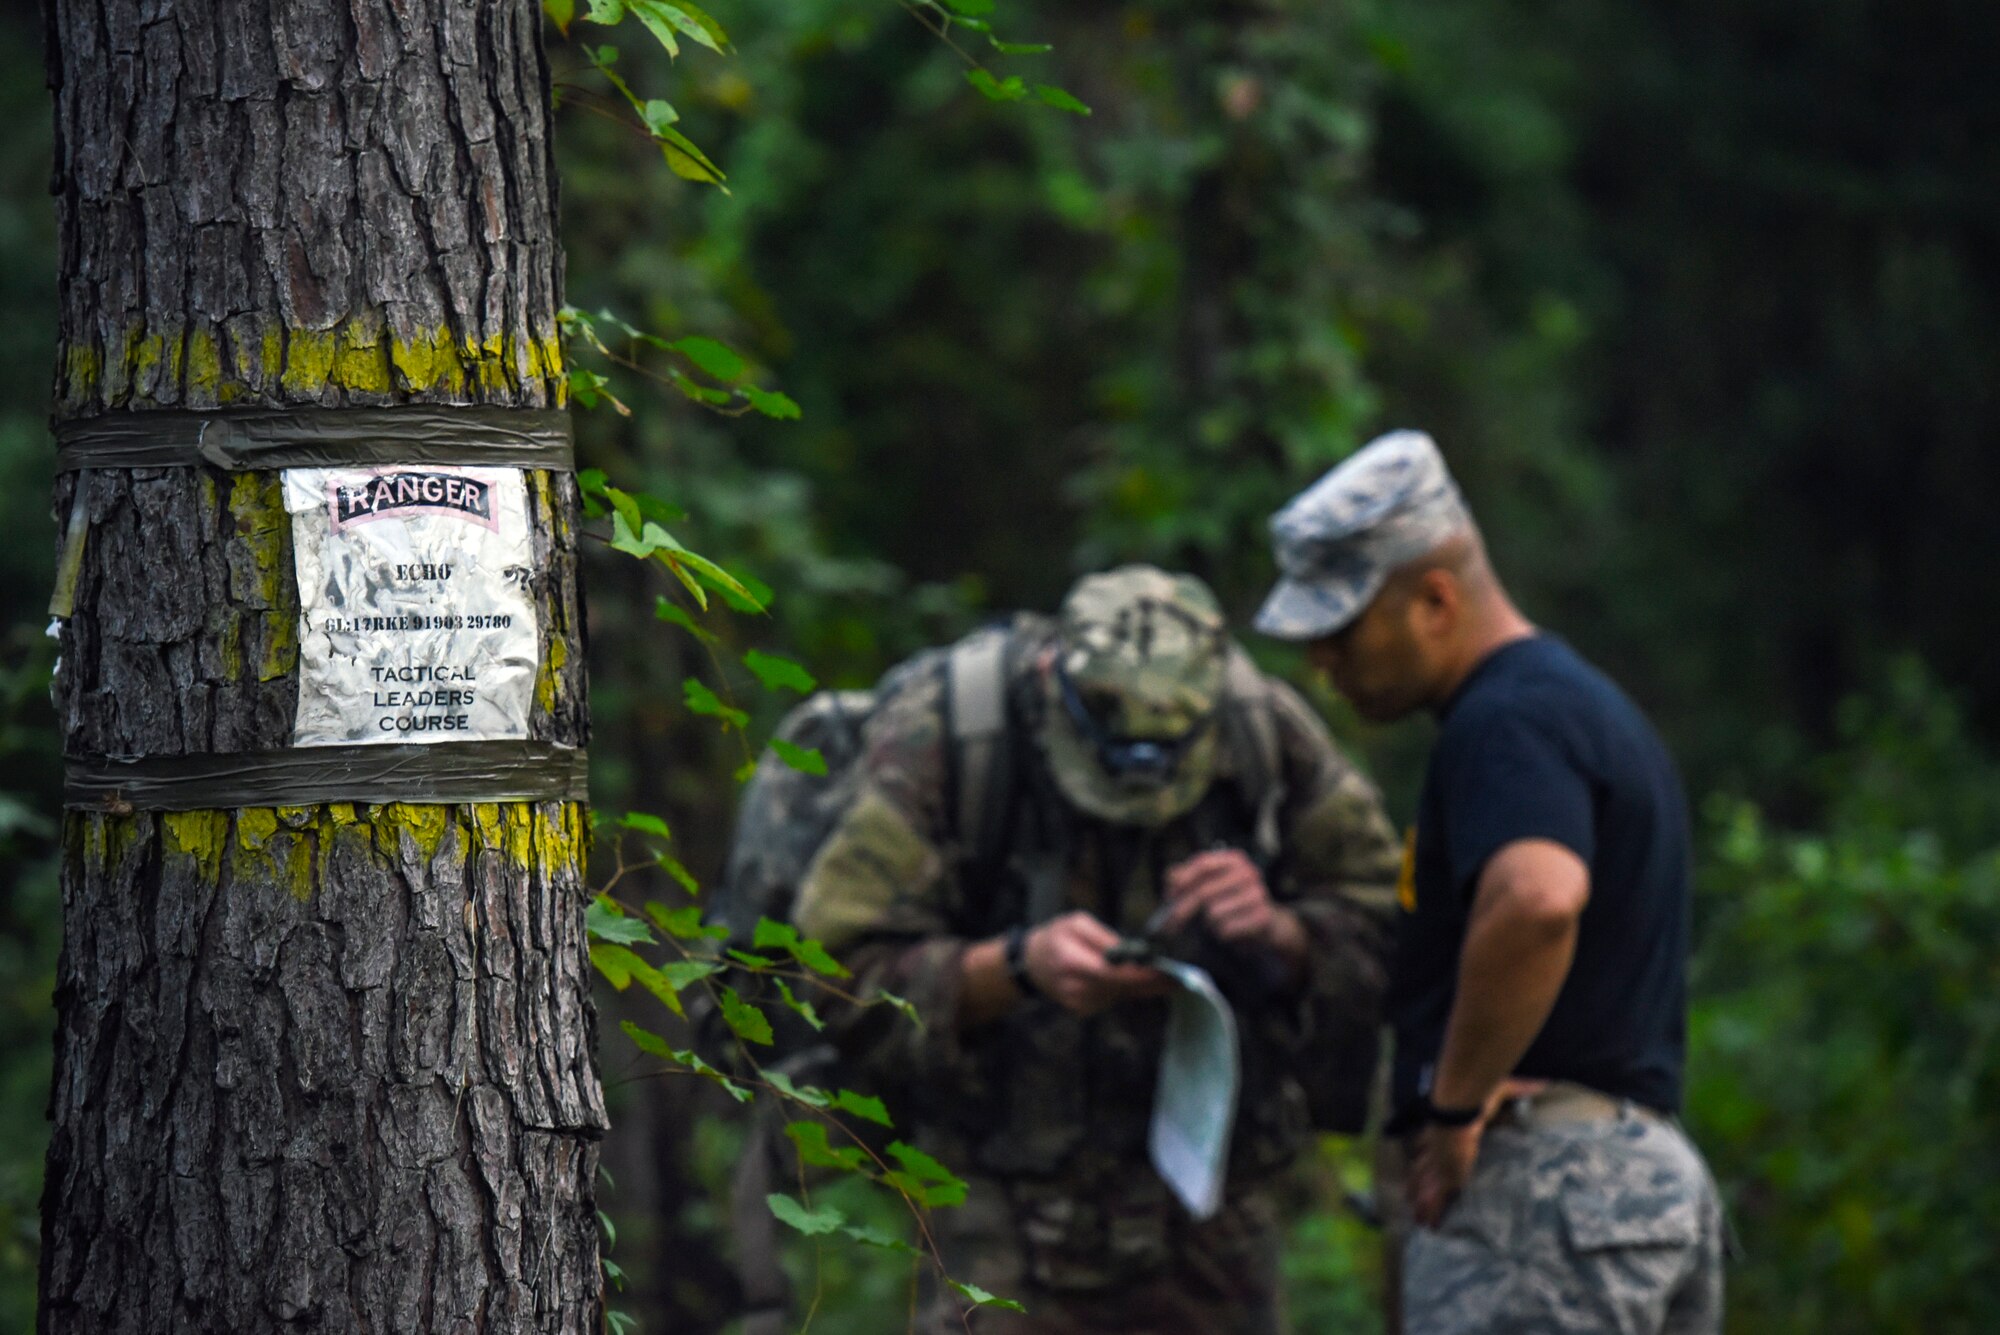 Senior Master Sgt. Dzajic Martinez, Pre-Ranger Assessment Course (Pre-RAC) instructor, right, reviews an Airmen’s land navigation coordinates during a Pre-RAC, Aug. 25, 2018, at Moody Air Force Base, Ga. Moody’s 93d Air Ground Operations Wing hosted the three-day assessment which challenged approximately 20 Airmen from the 93d AGOW and 23d Wing on their physical fitness, land navigation skills, leadership qualities, water confidence and academic and tactical abilities under duress. The evaluation is designed to determine whether Airmen are ready to attend the Air Force Ranger Assessment Course held at Fort Bliss, Texas. (U.S. Air Force photo by Senior Airman Greg Nash)